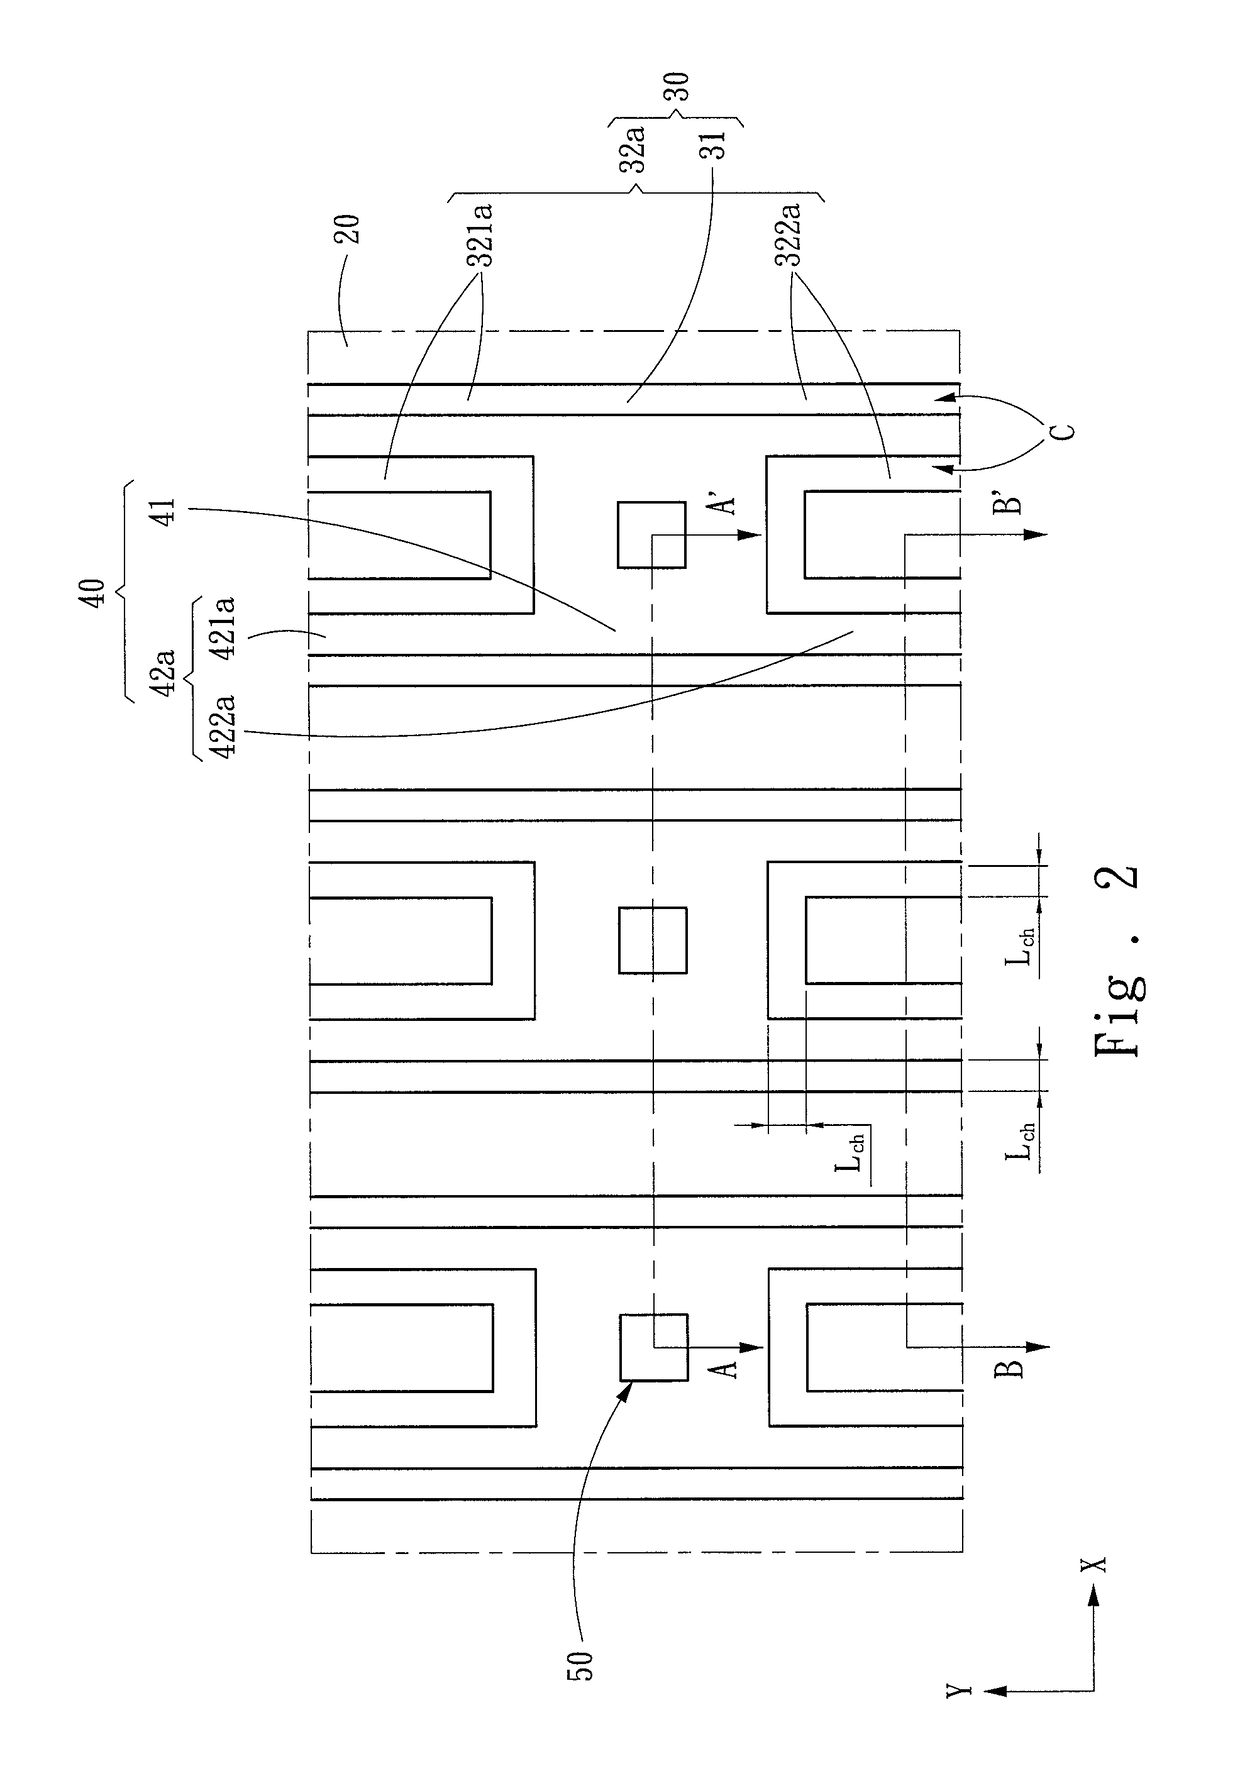 Semiconductor power device